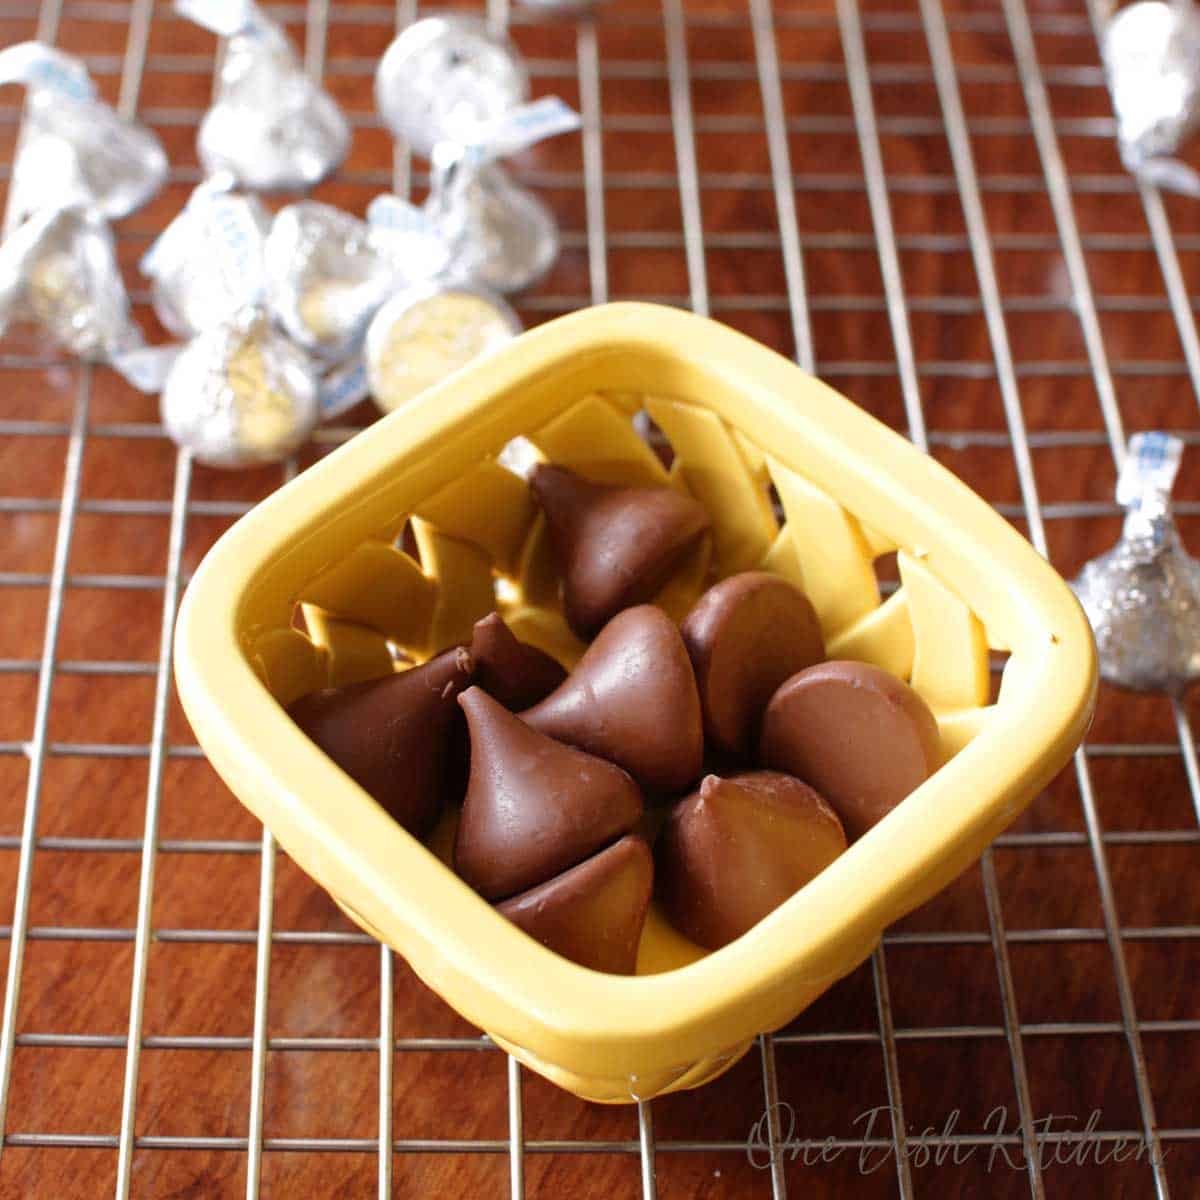 A small bowl of unwrapped hershey's kisses on a cooling rack with scattered hershey's kisses